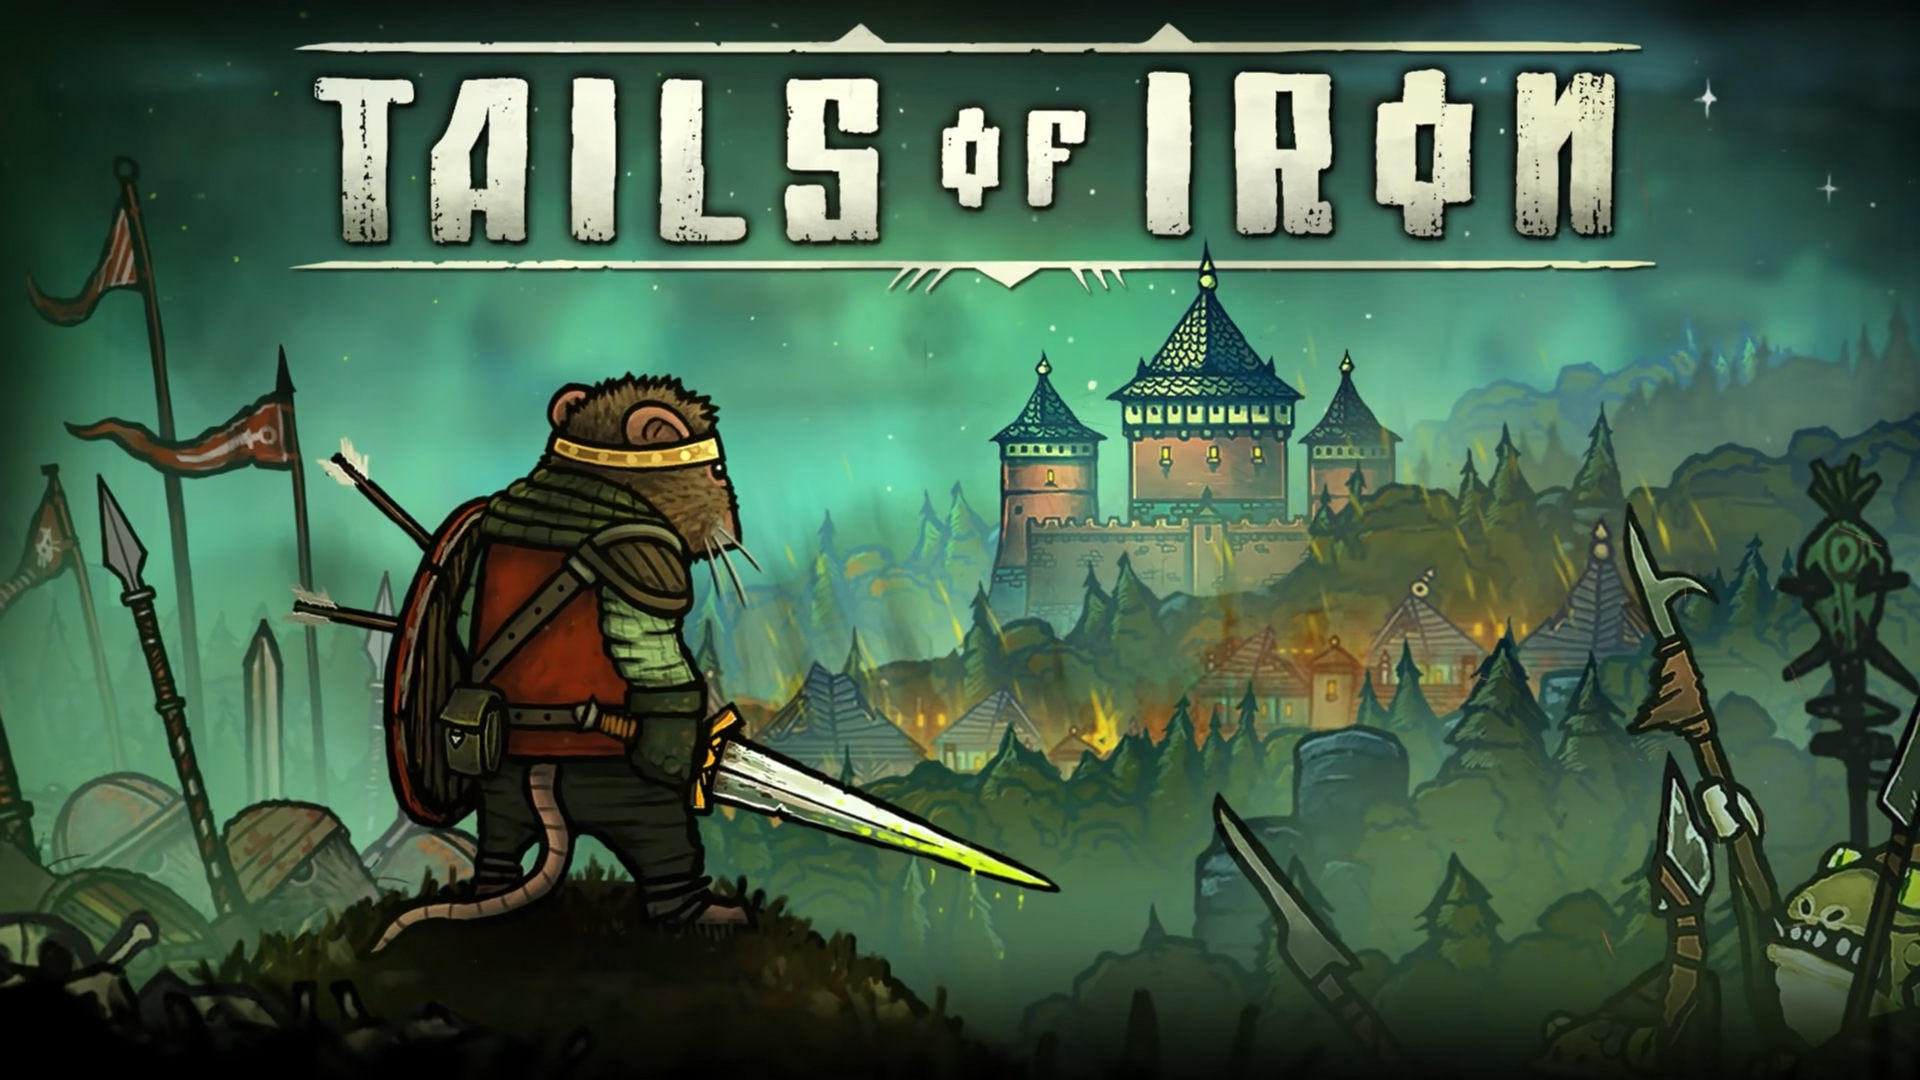 download the new for windows Tails of Iron